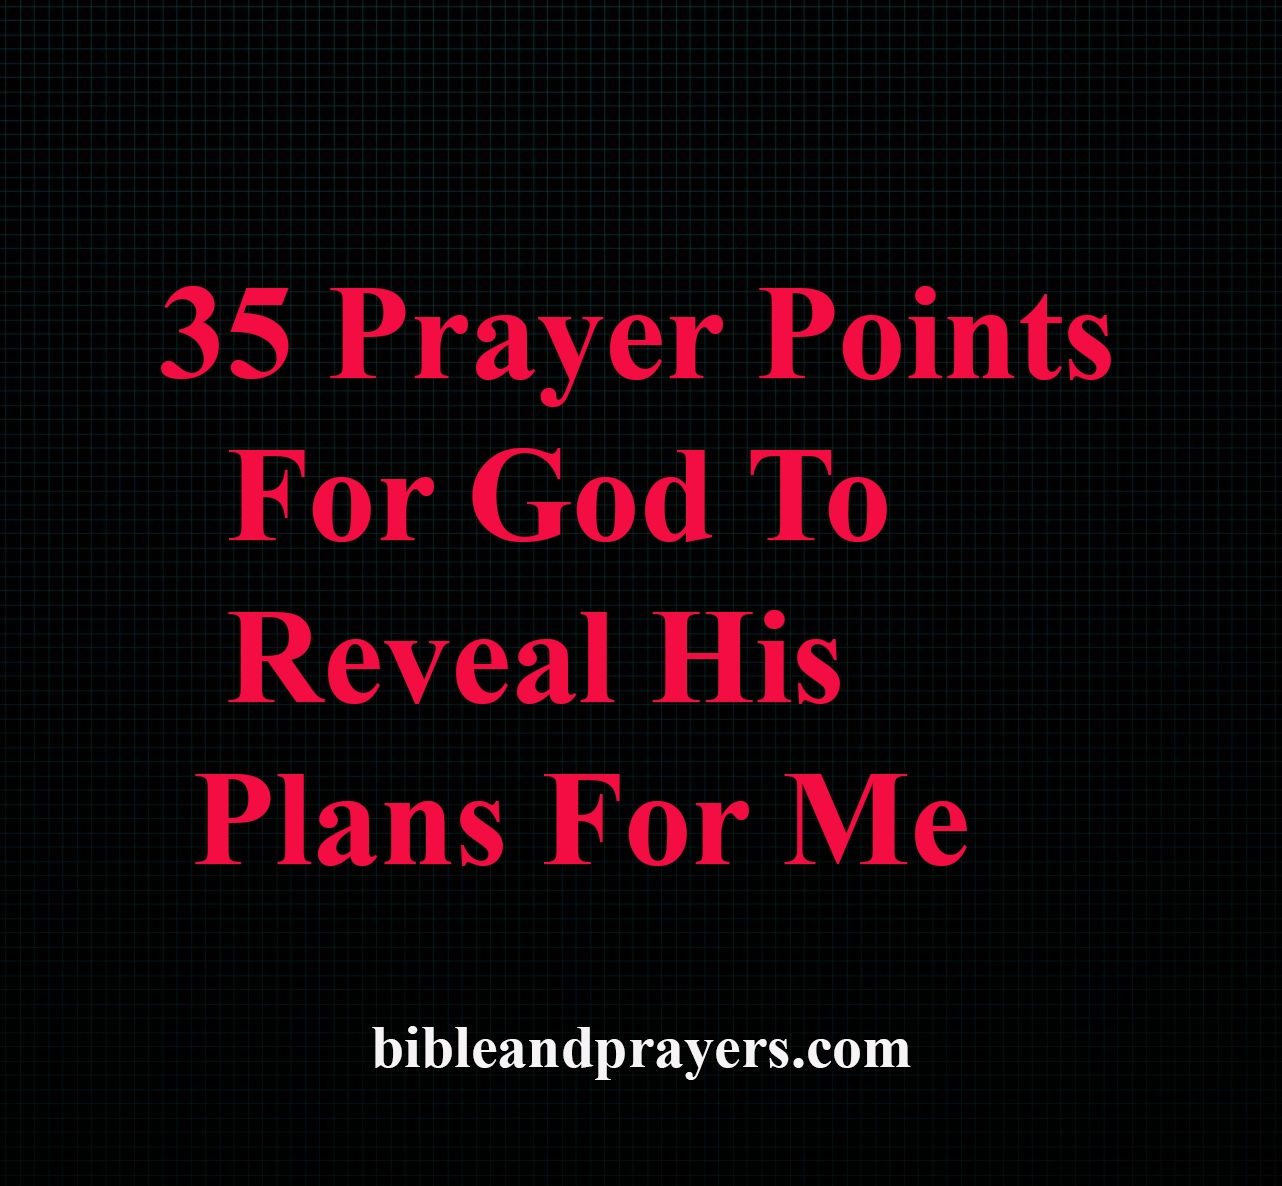 35 Prayer Points For God To Reveal His Plans For Me